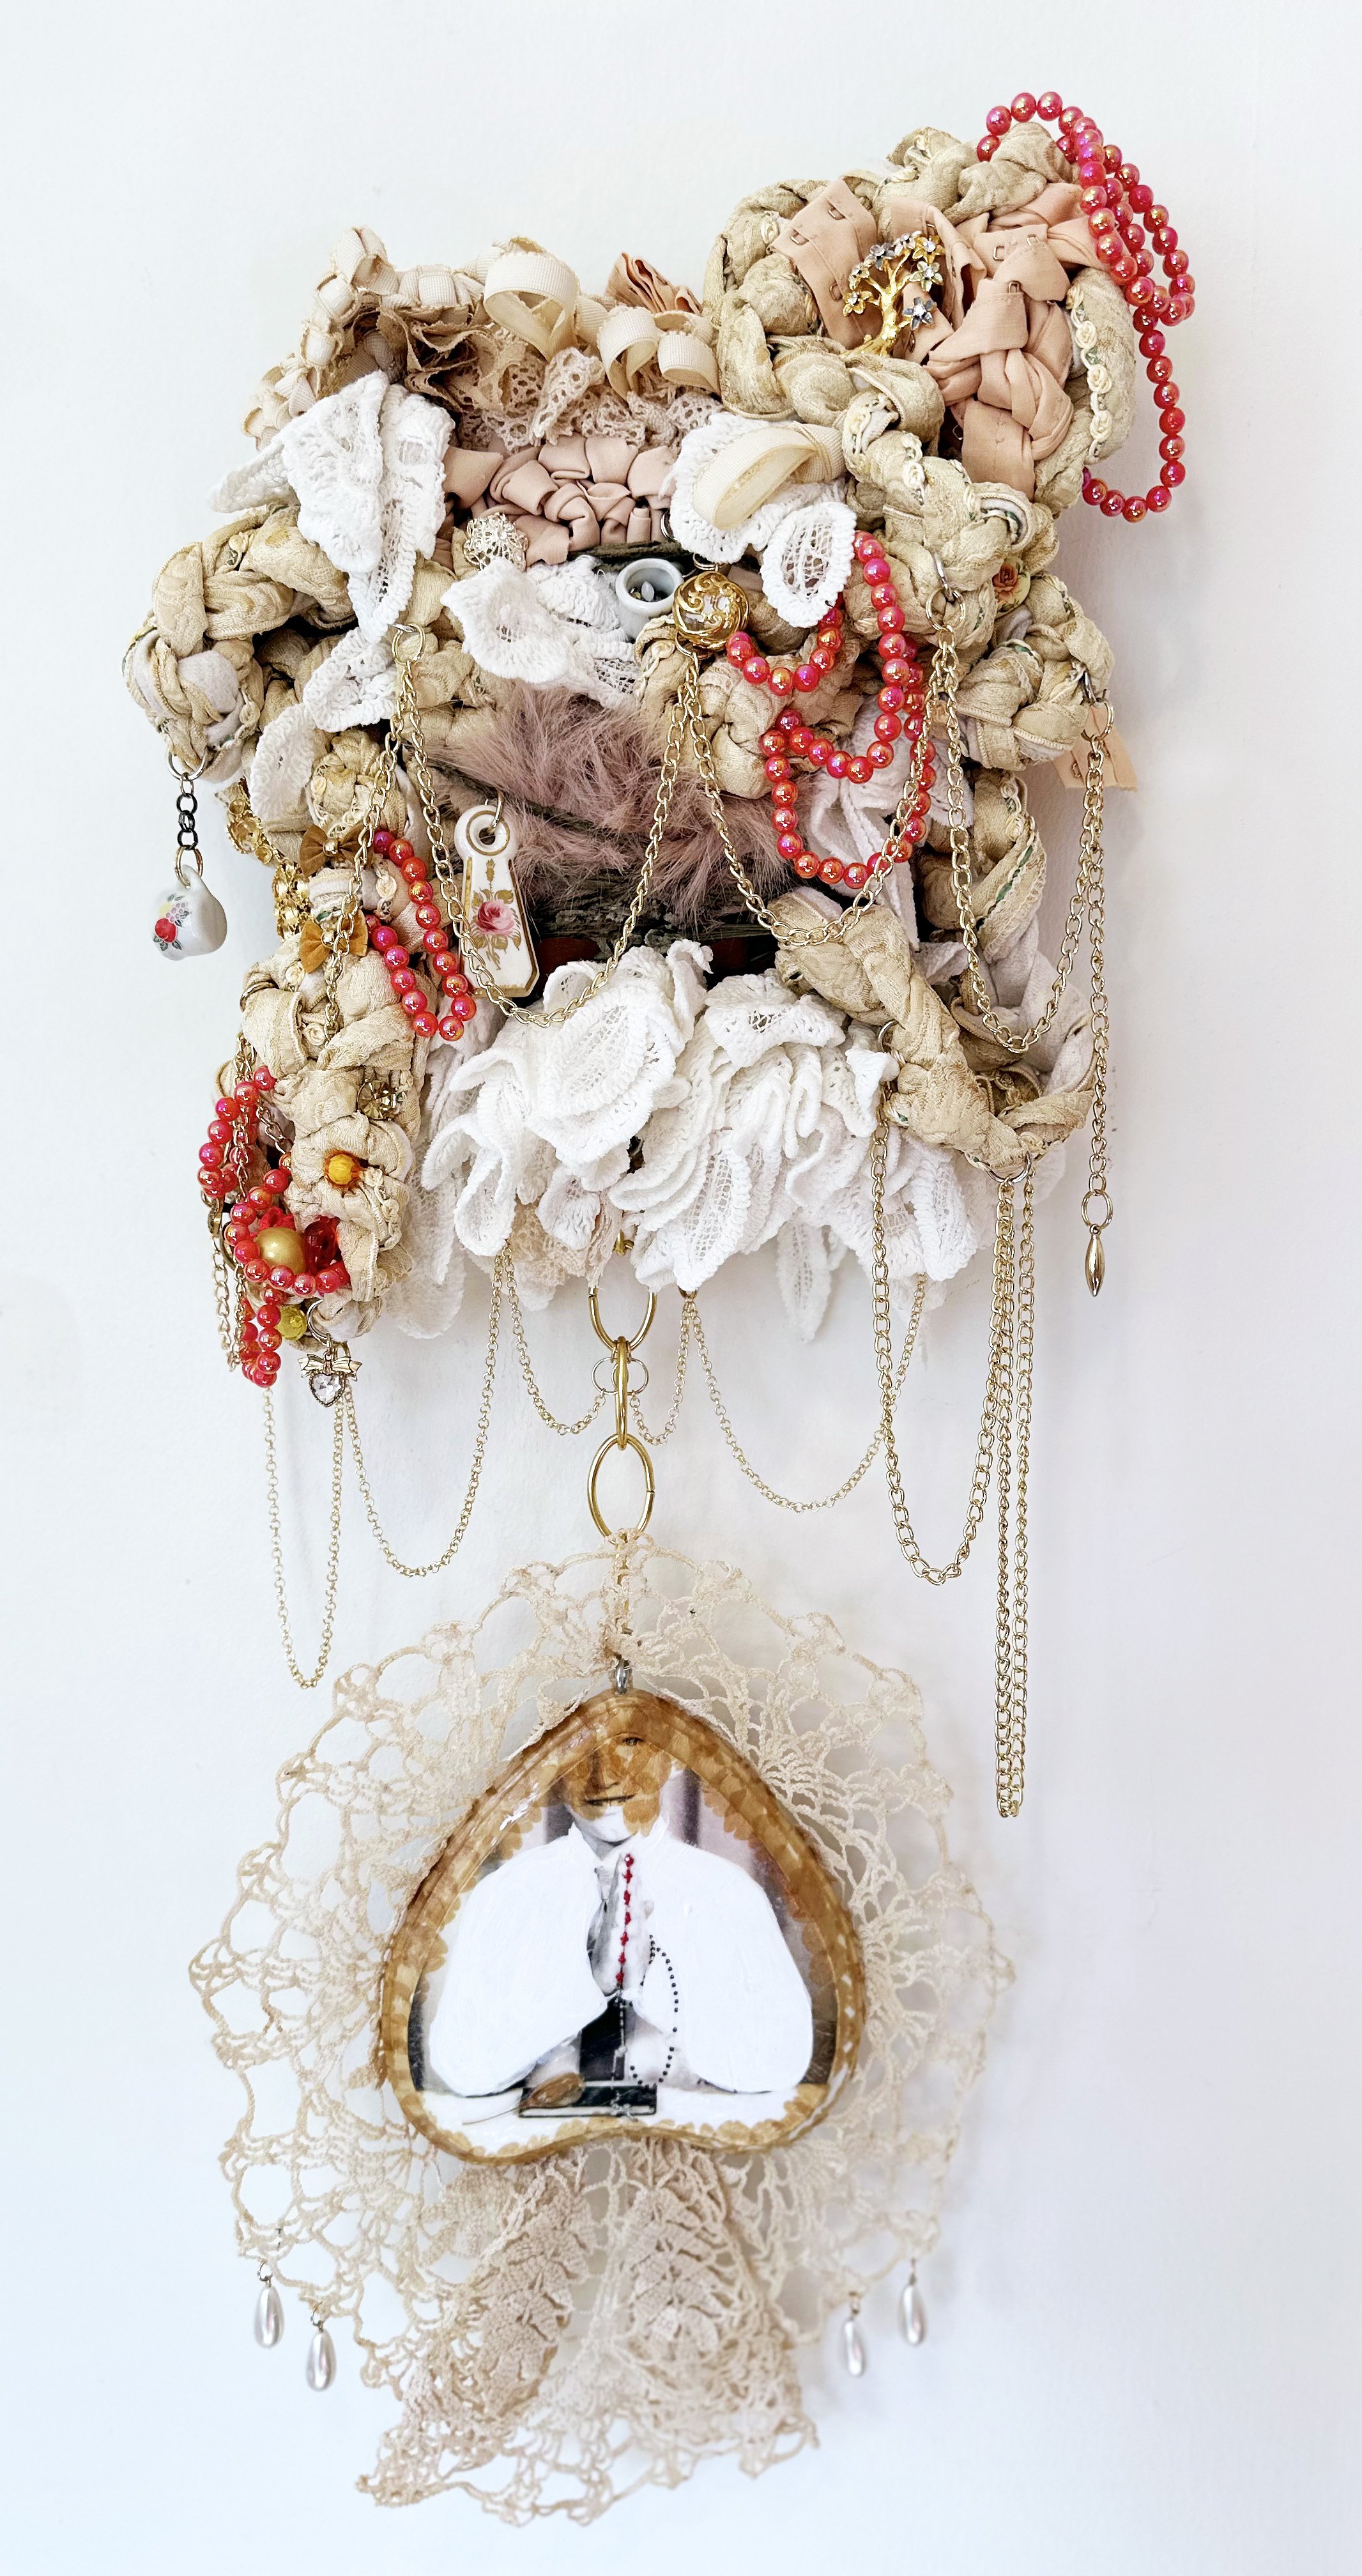 BrianAndrewWhiteley_We Enter on Love;_Collage, beads, trimmings, fabric, yarn, chains, mini porcelain keychains_33” x 14”_2024_StephanieMcGovern.jpeg